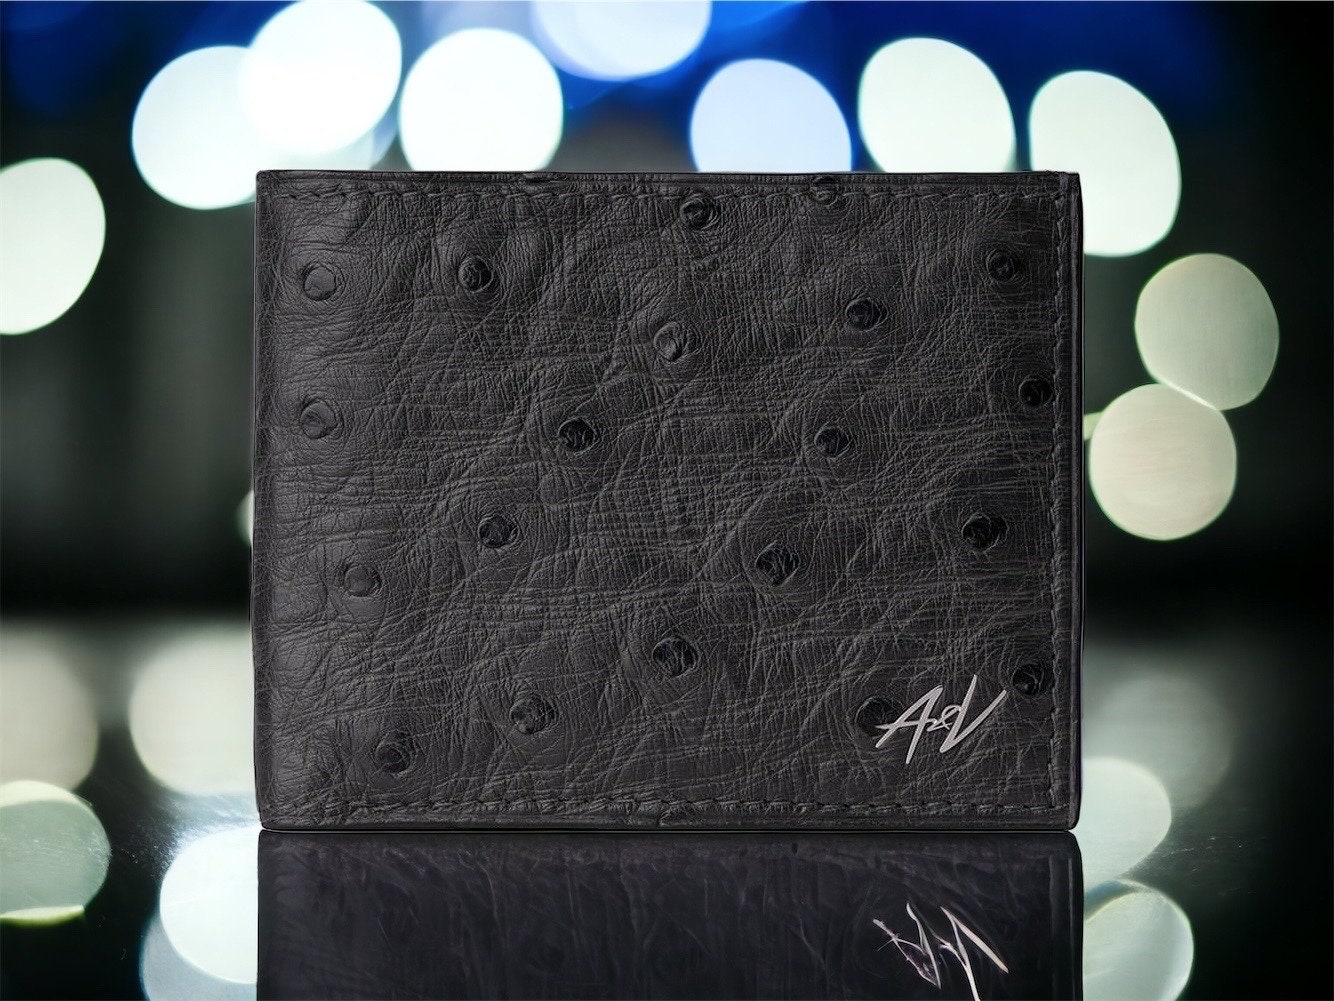 Wallet OSTRICH LEATHER MIDNIGHT DREAM buy with discount & delivery - A&V